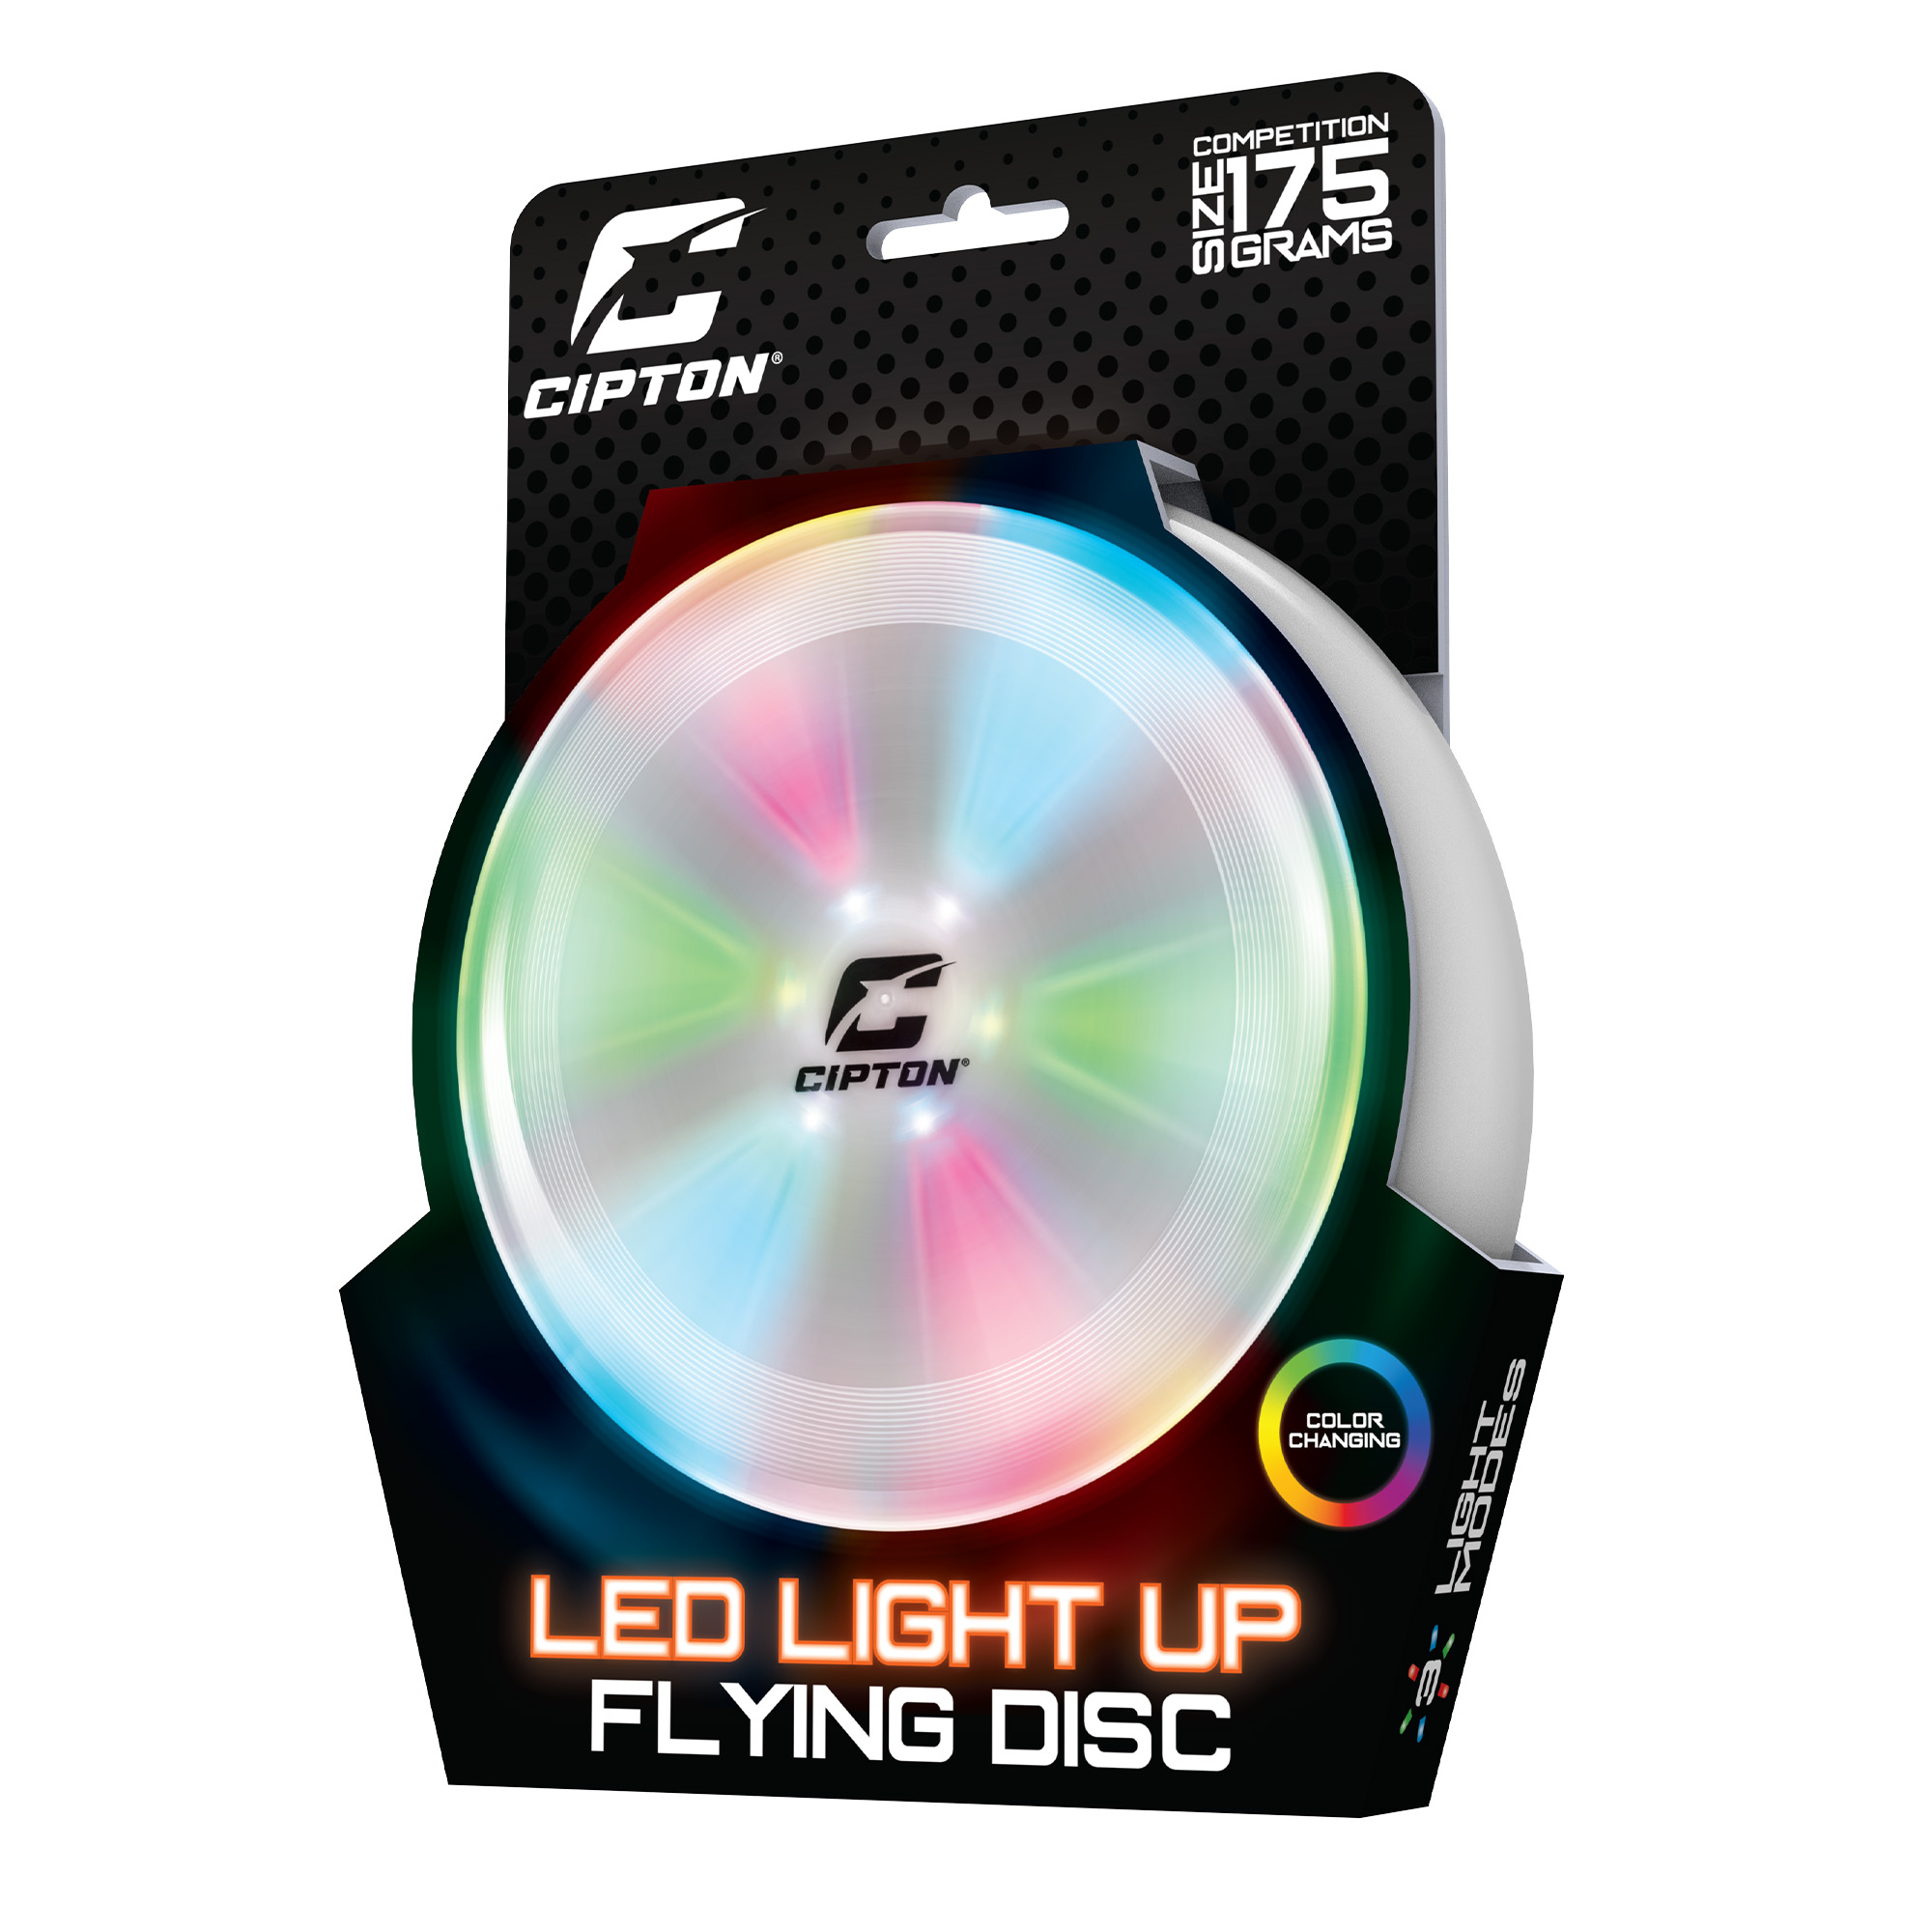 CIPTON Light up Flying Disc - Solid, Rotary, and Blinking LED Light Frisbee Modes - 9.5 inch - image 2 of 8